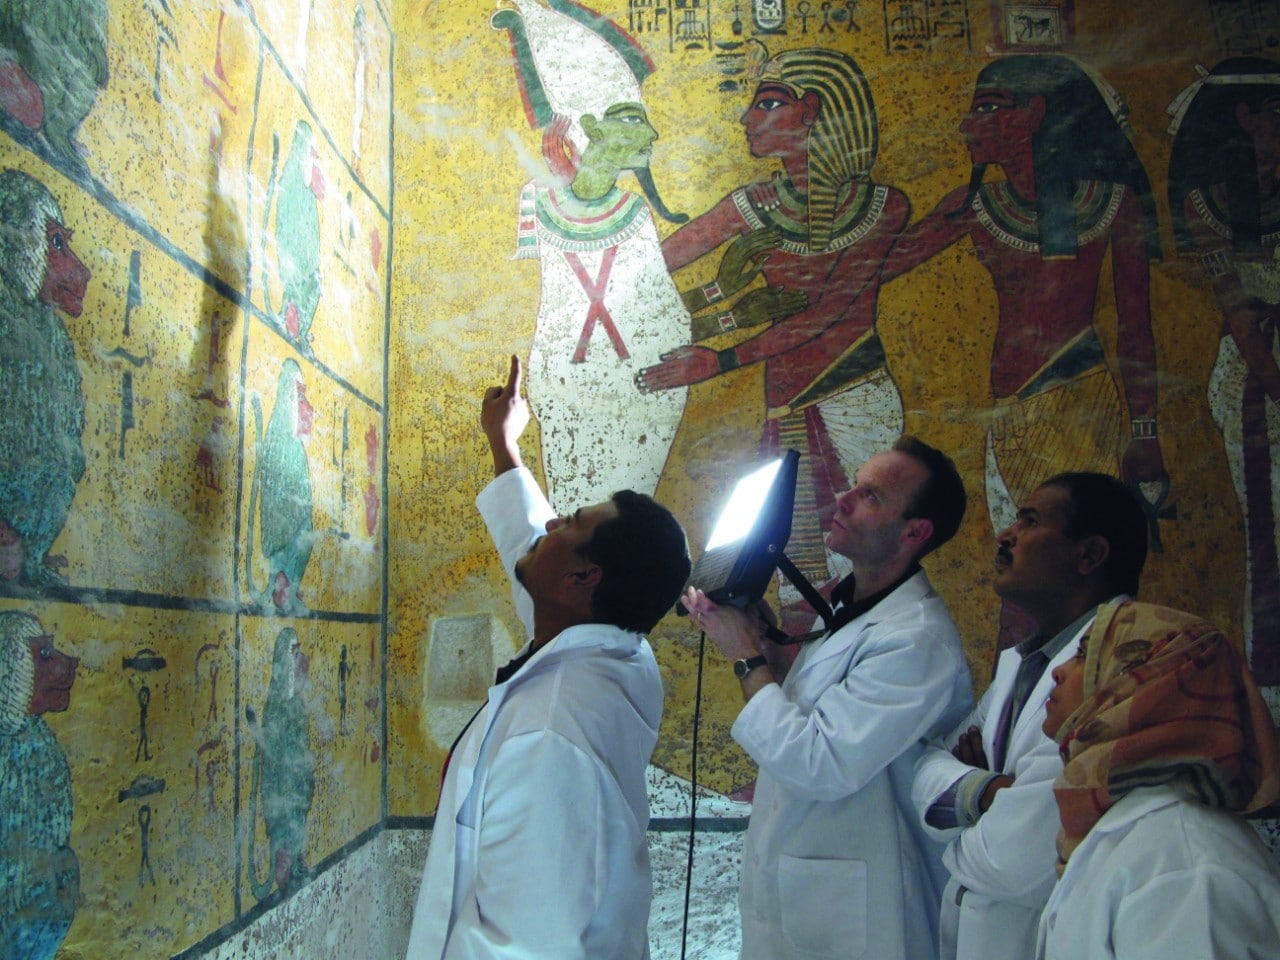 Four people in white lab coats - one pointing a large light at the wall - are looking at decoratively painted walls in the tomb of Tutankhamen.